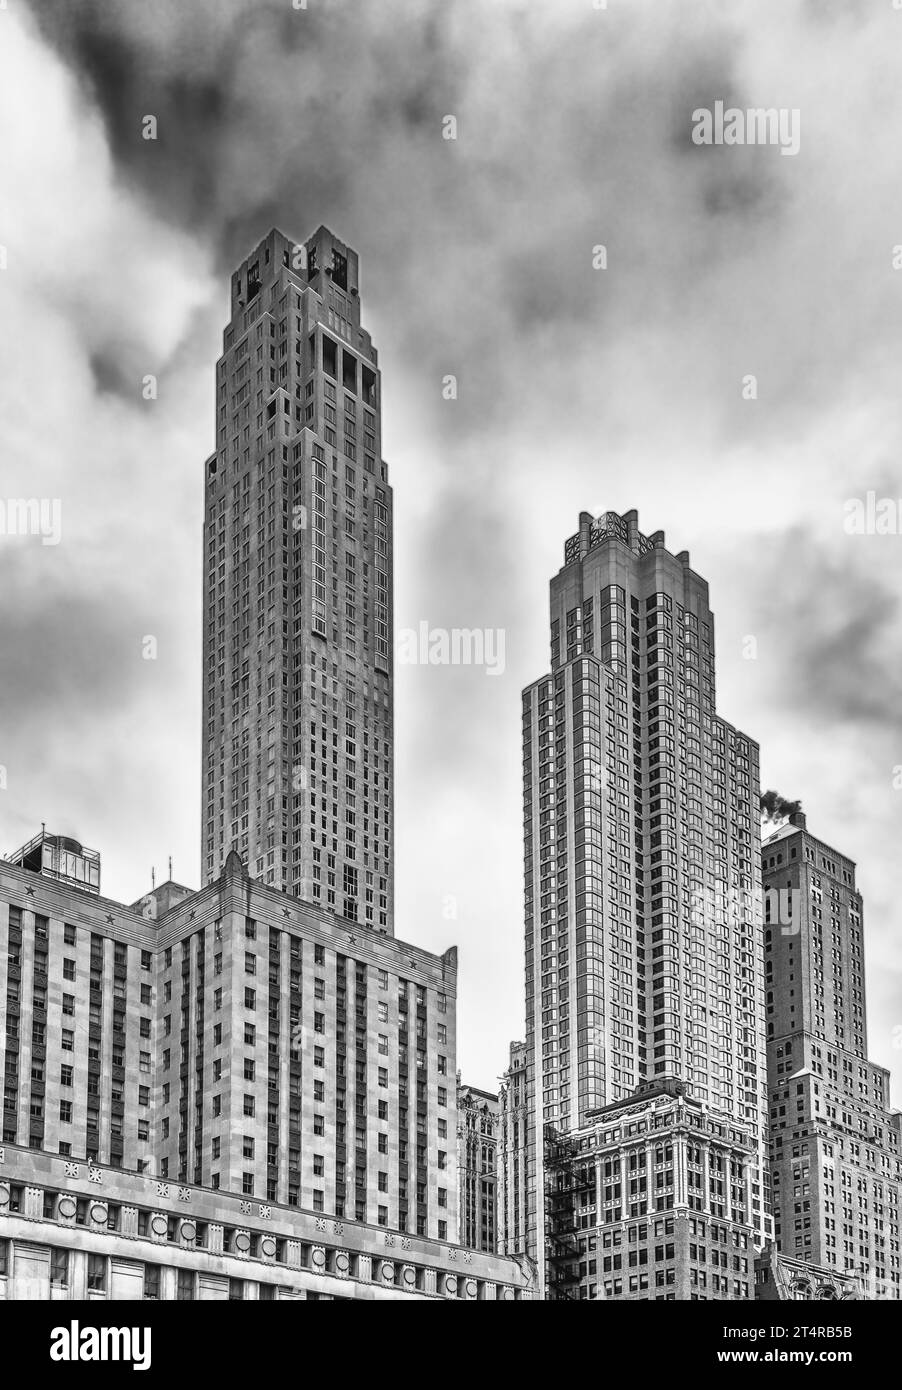 New York City, USA, Jan 16th 2018, view of the upper part of the Barclay Tower-Glenwood building and the Four Seasons Hotel building in the Tribeca ne Stock Photo